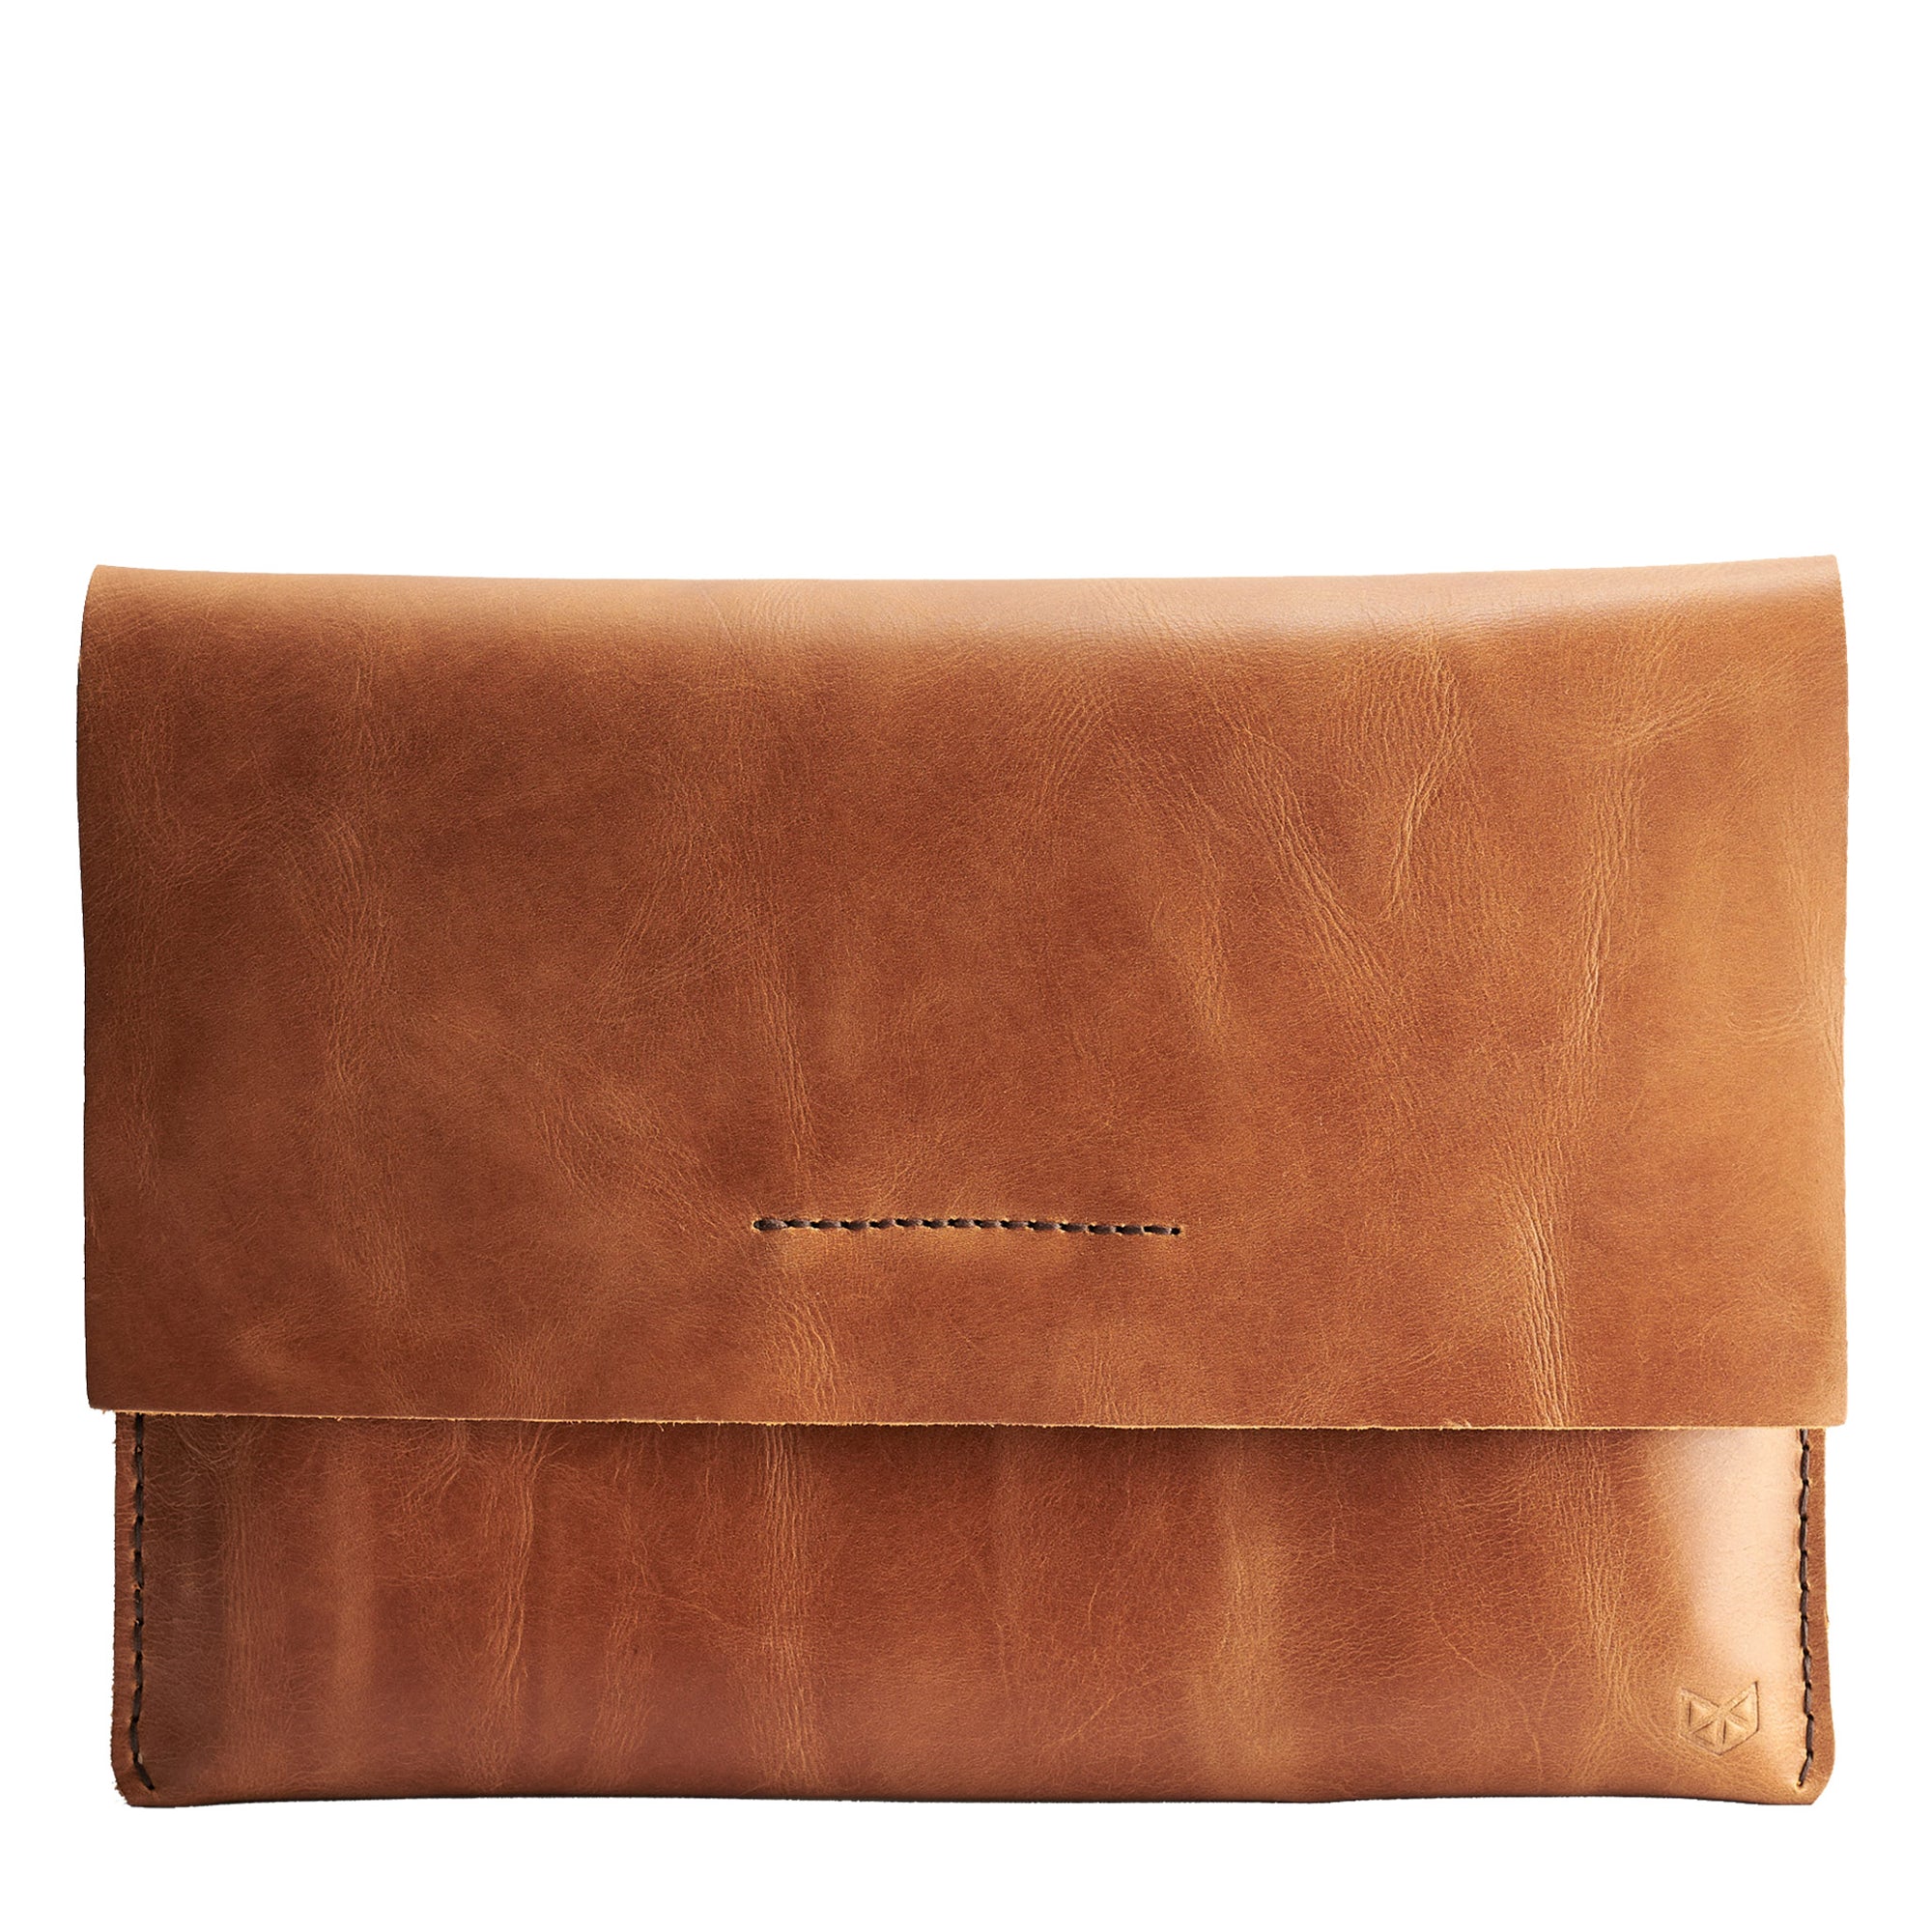 Cover. Google Pixelbook light brown leather sleeve for men